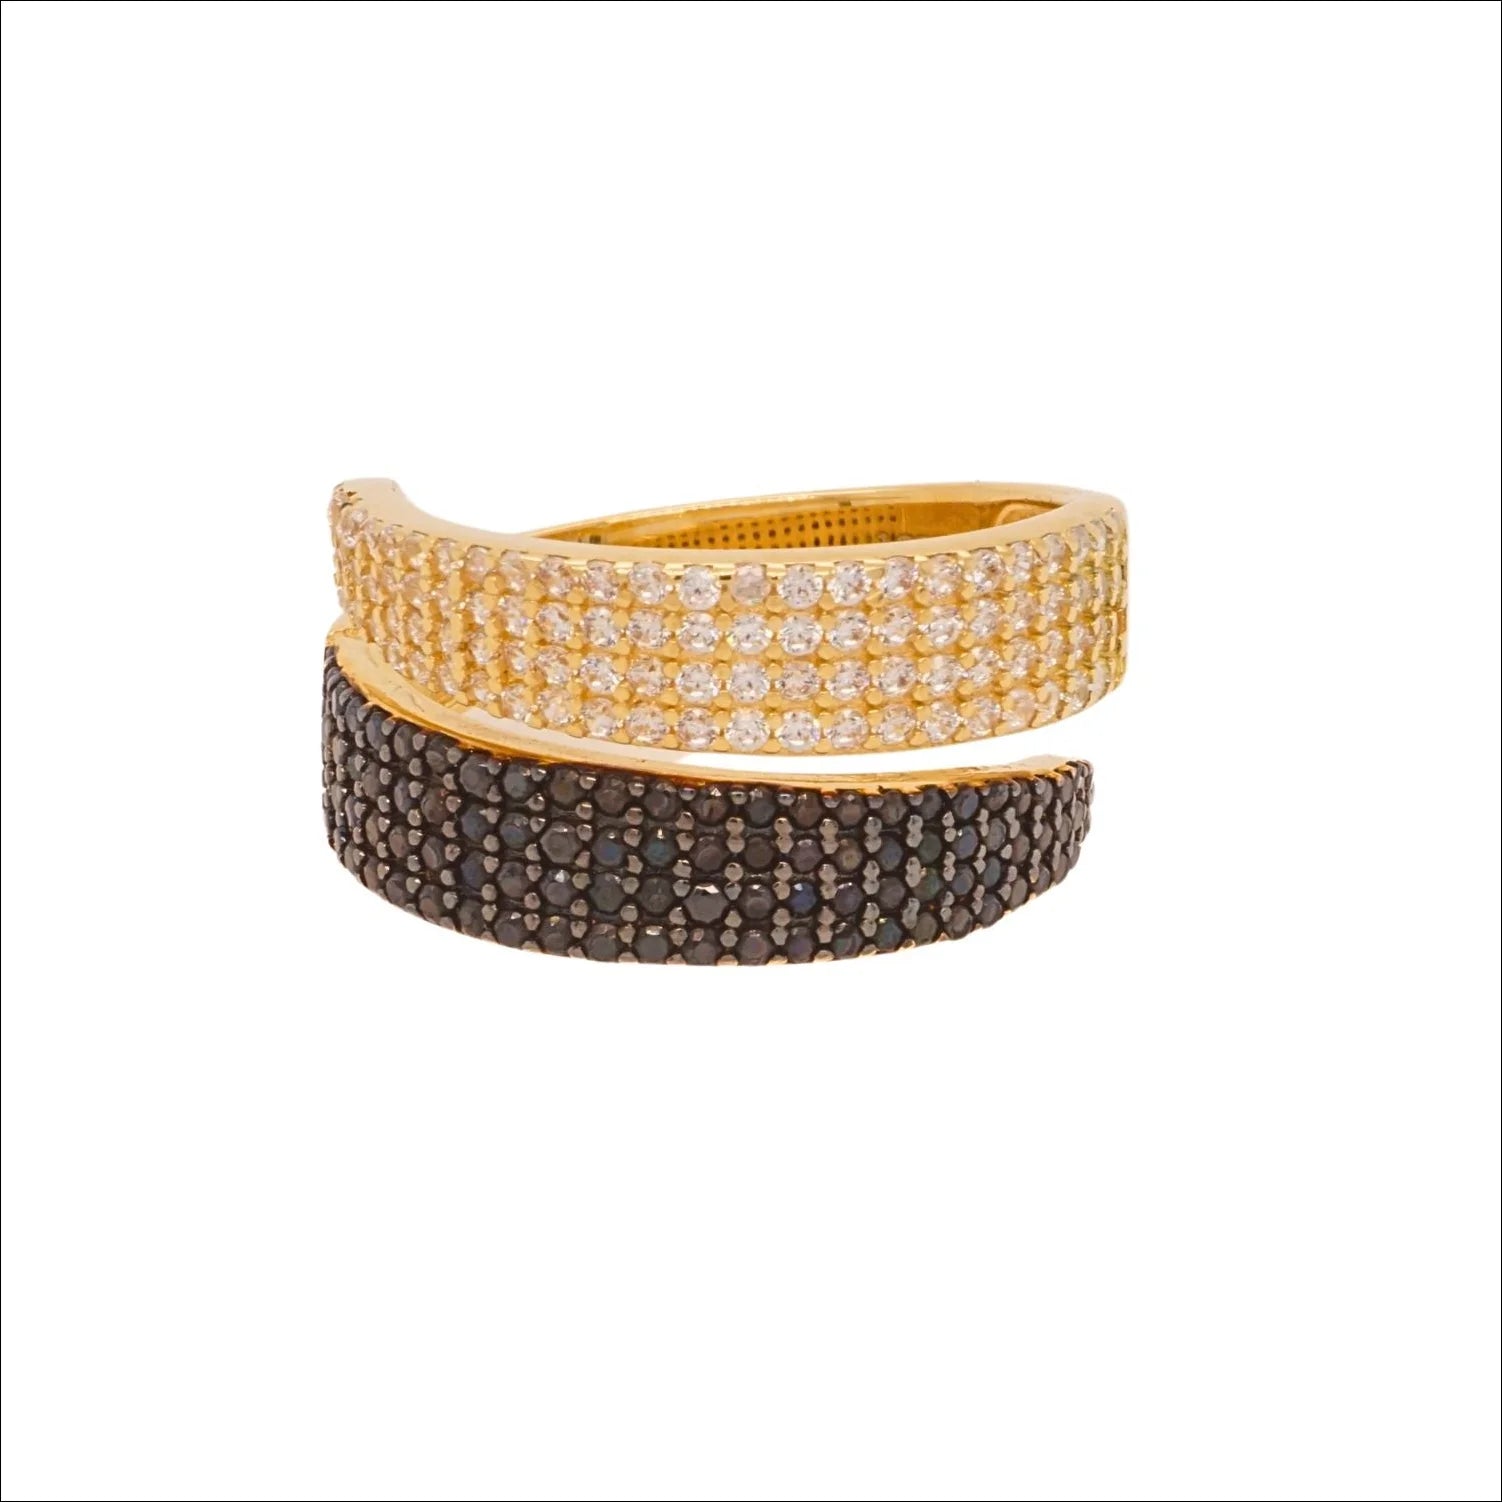 Elegance in Contrast: The 18k Gold Ring Adorned with Black